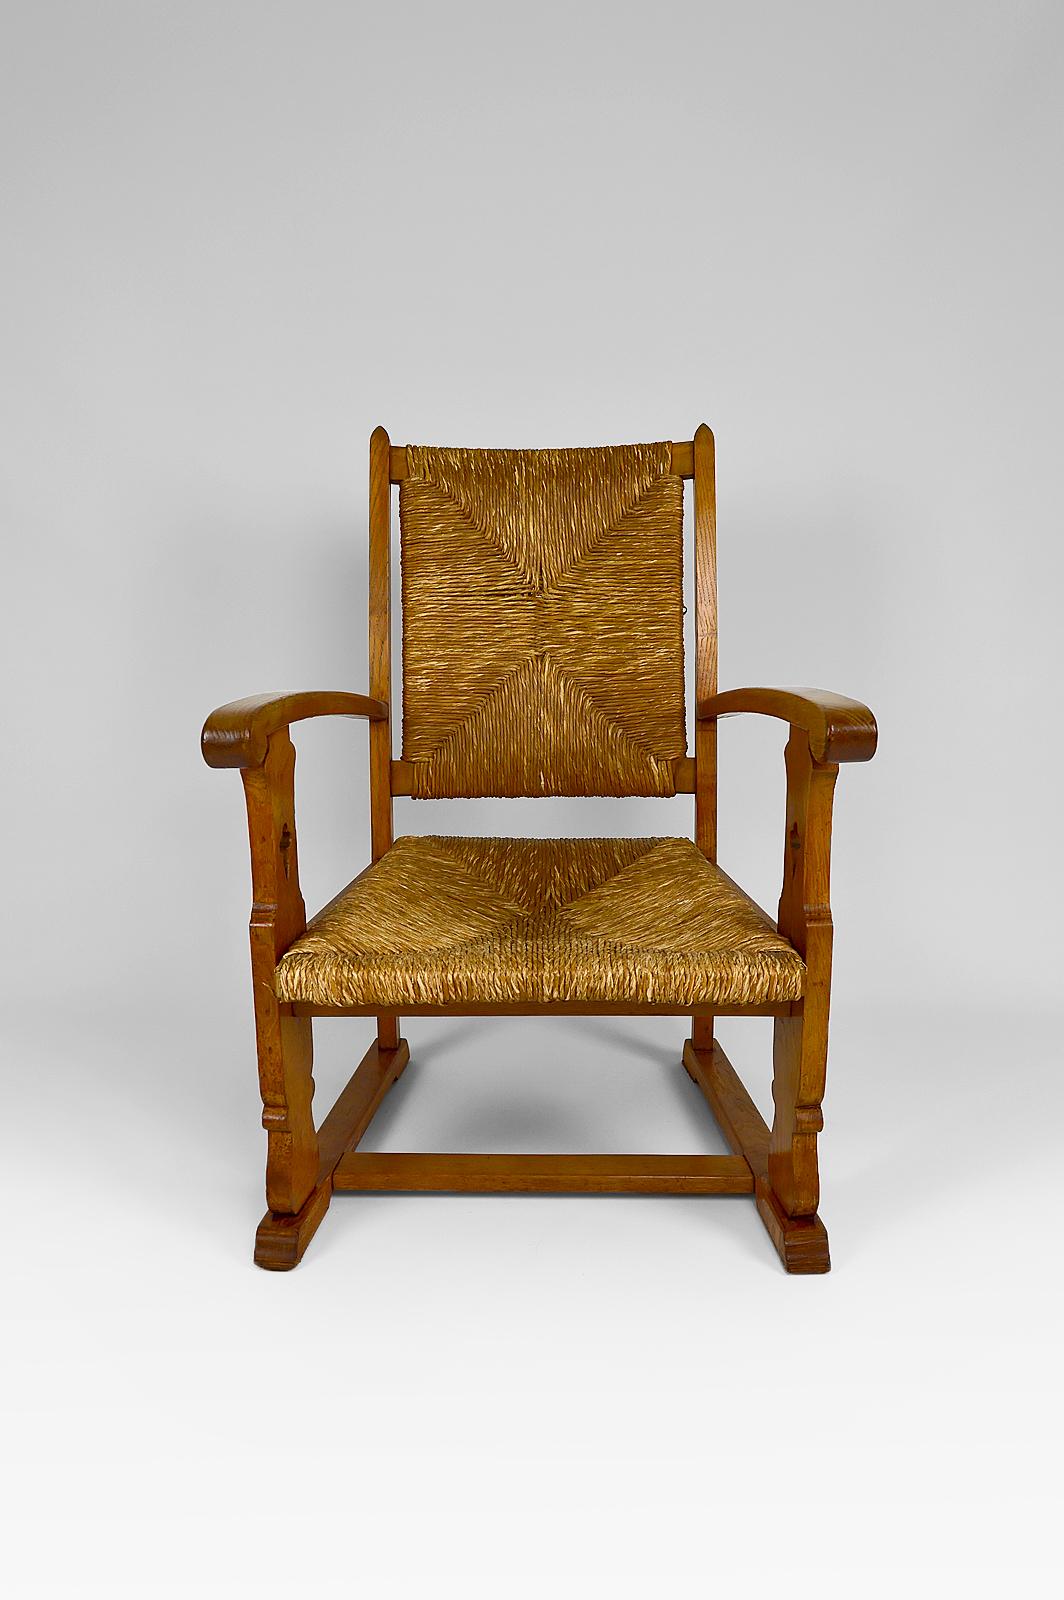 European Art & Crafts / Gothic Revival Armchair in Oak and Straw, circa 1900